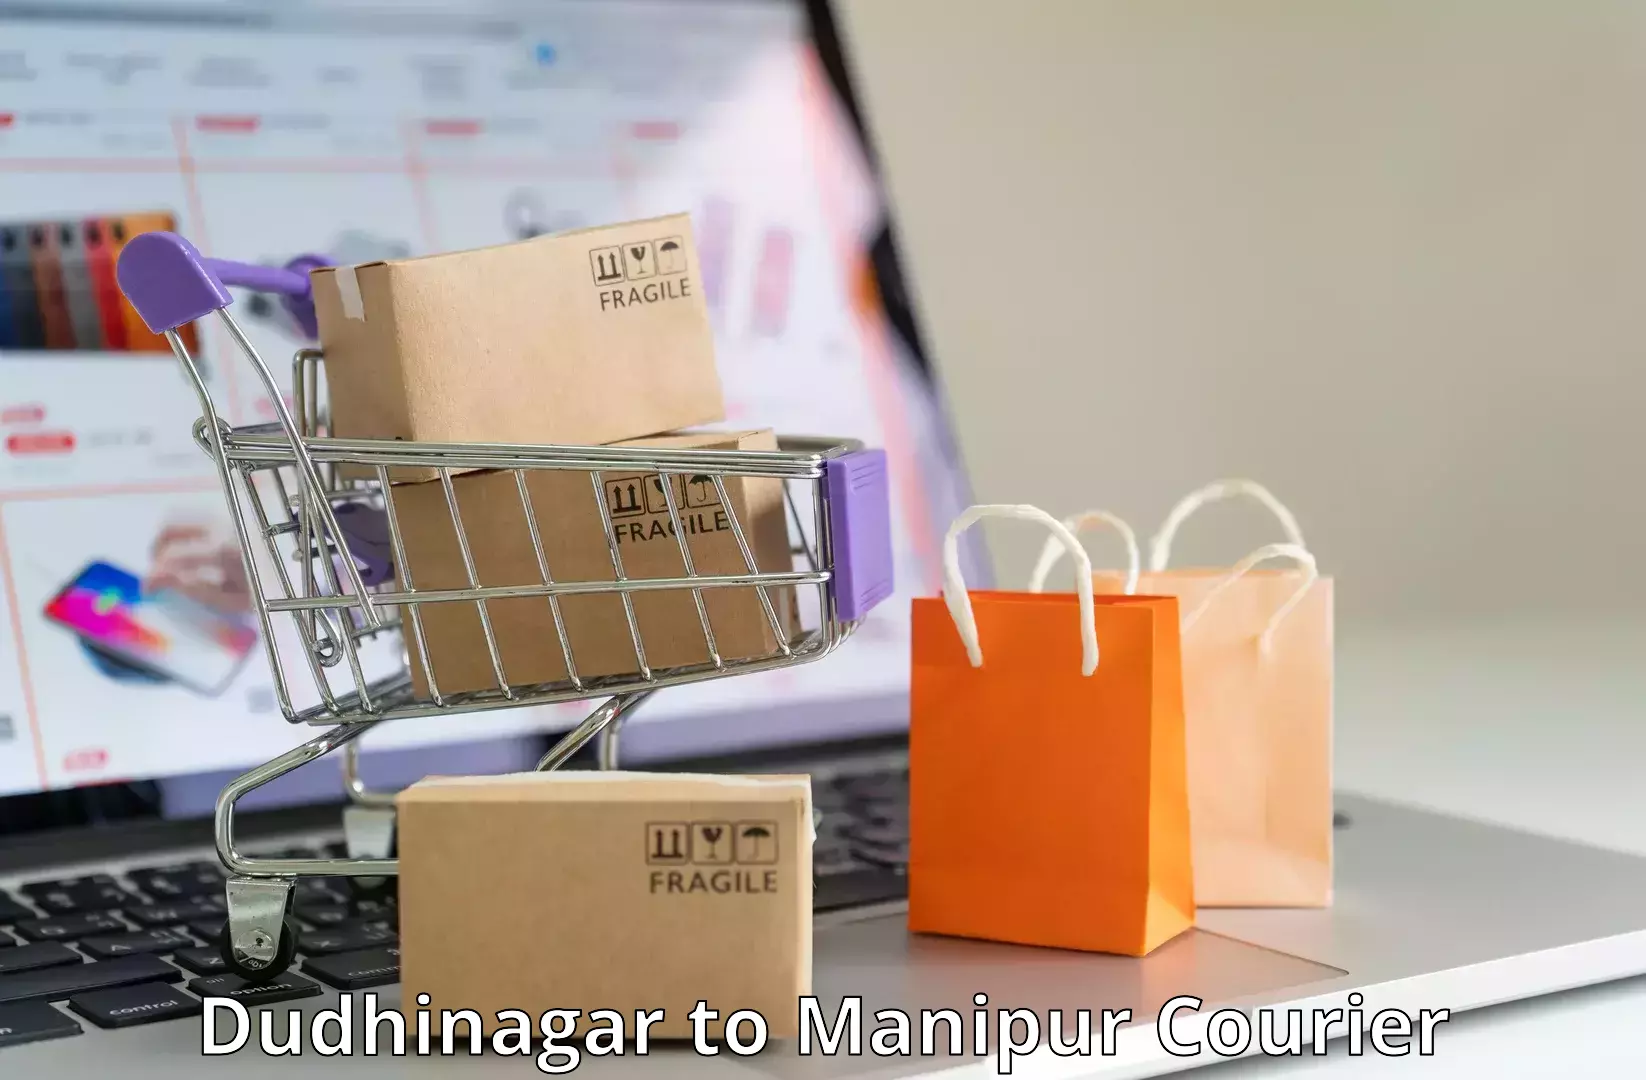 Affordable logistics services Dudhinagar to Chandel